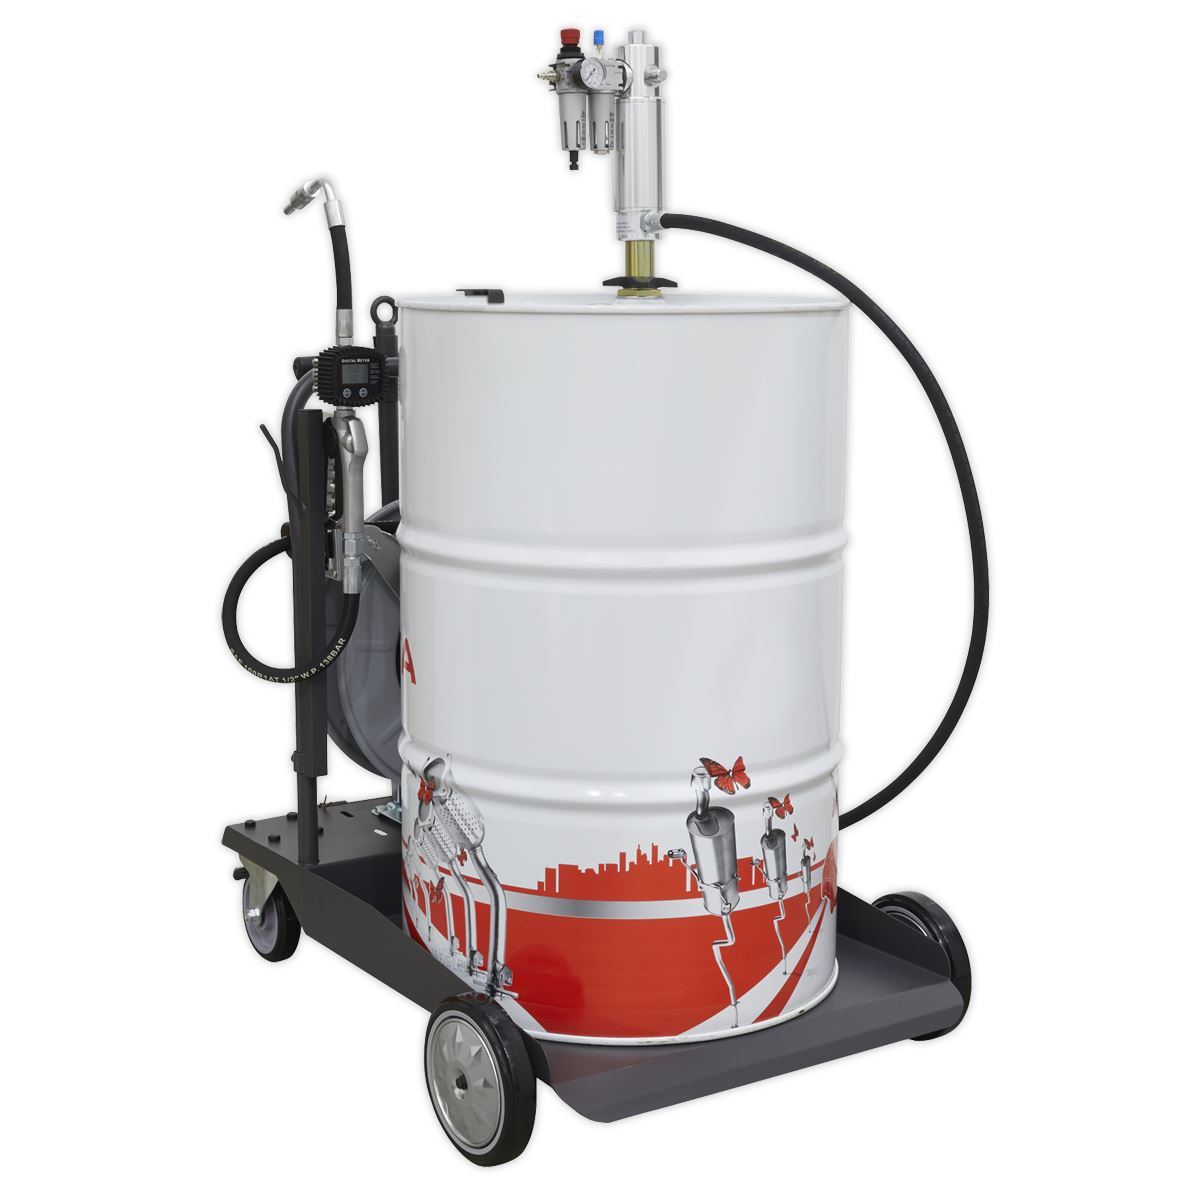 Sealey Oil Dispensing System Air Operated with 10m Retractable Hose Reel